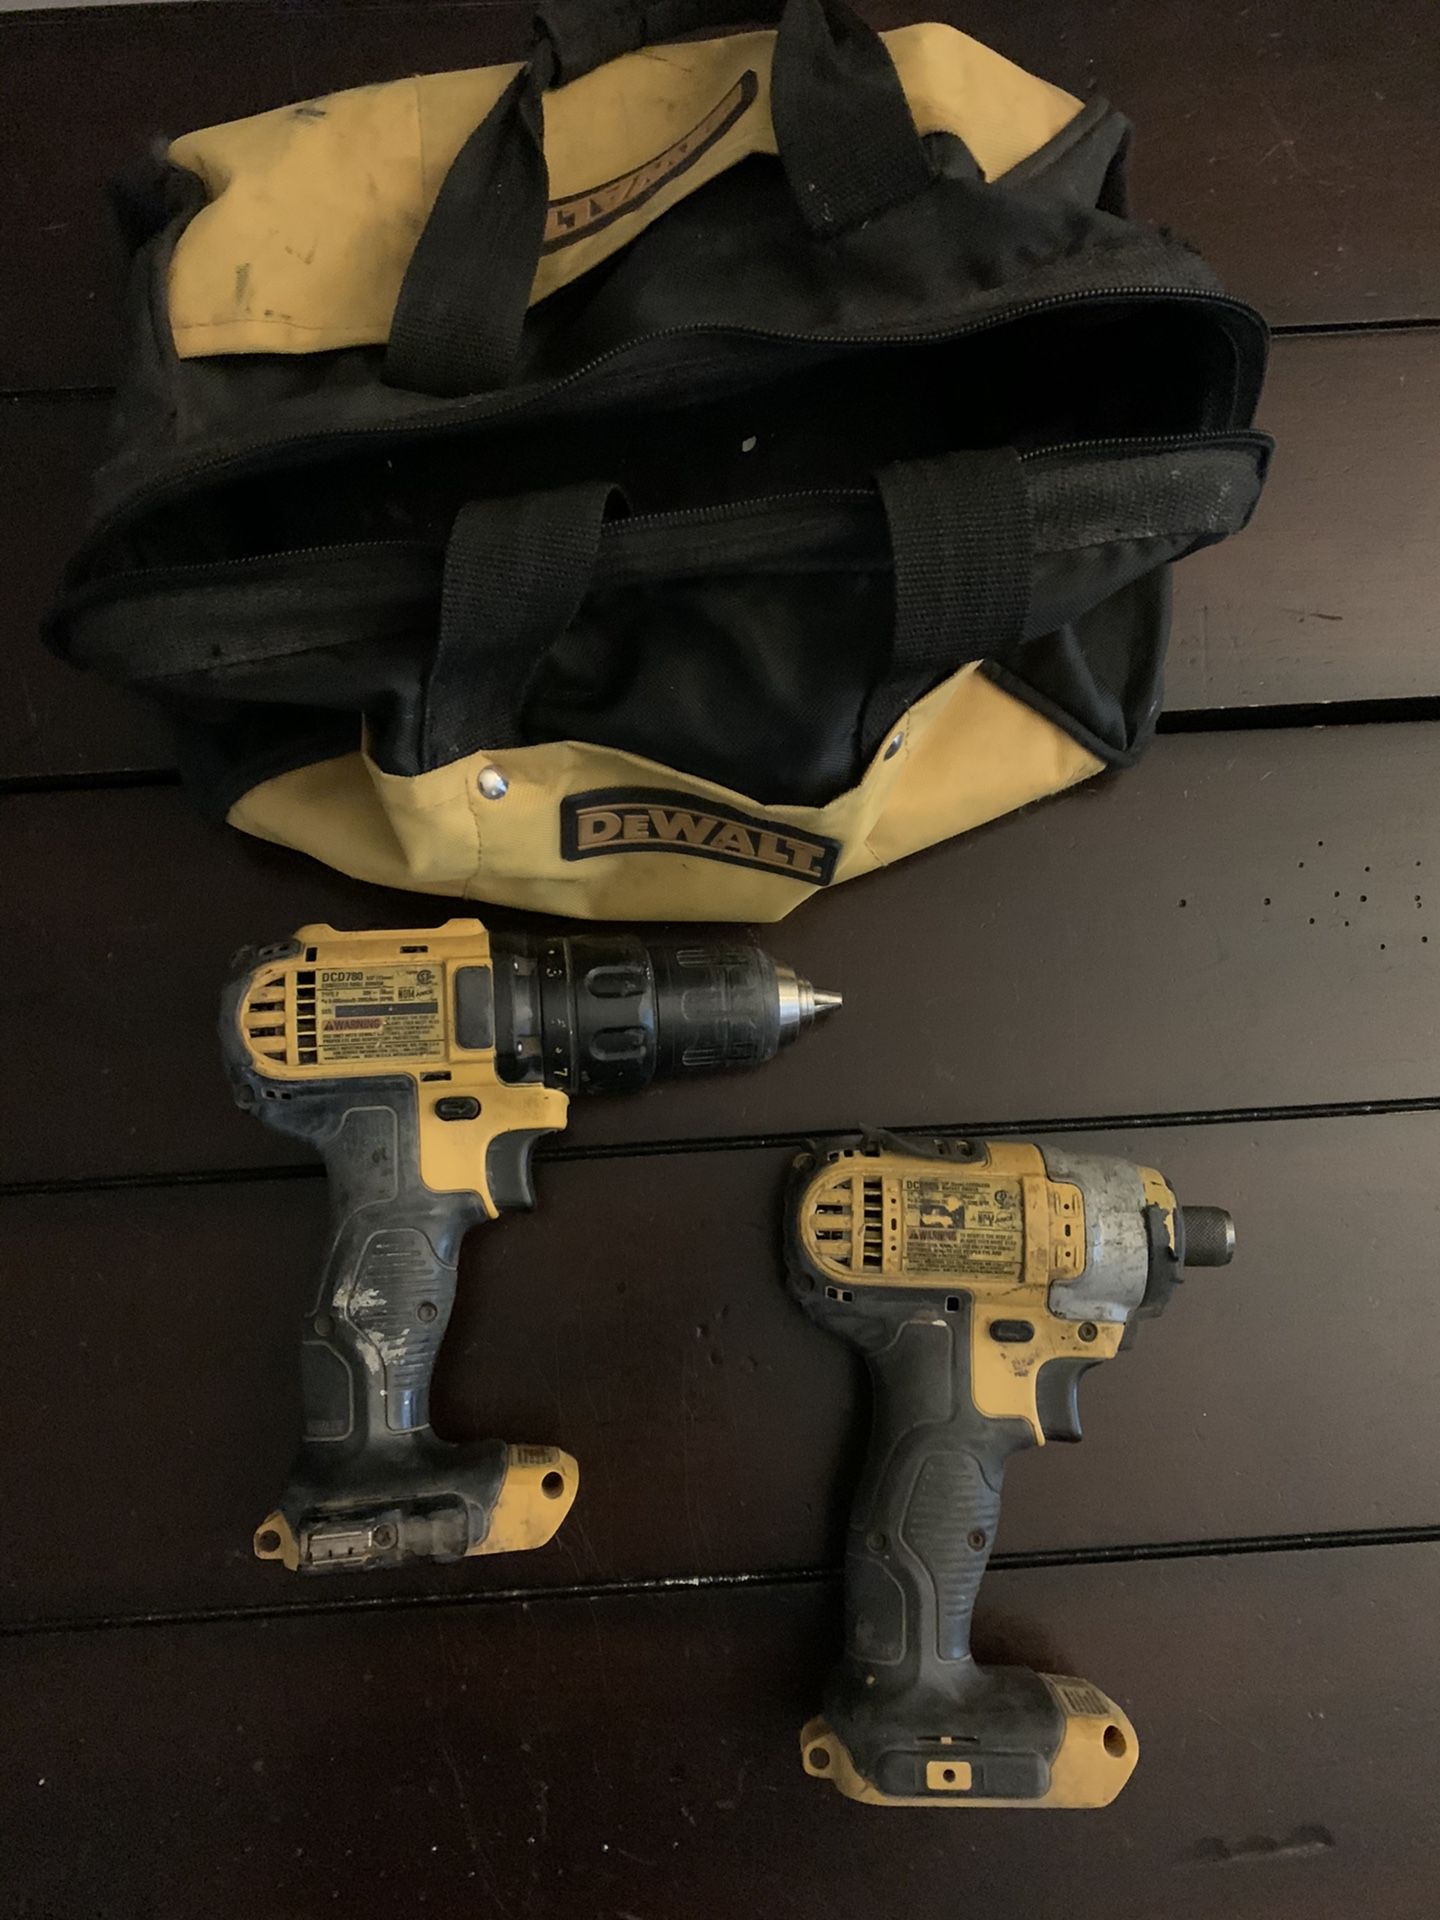 Dewalt cordless drill and driver and 1/4” impact driver